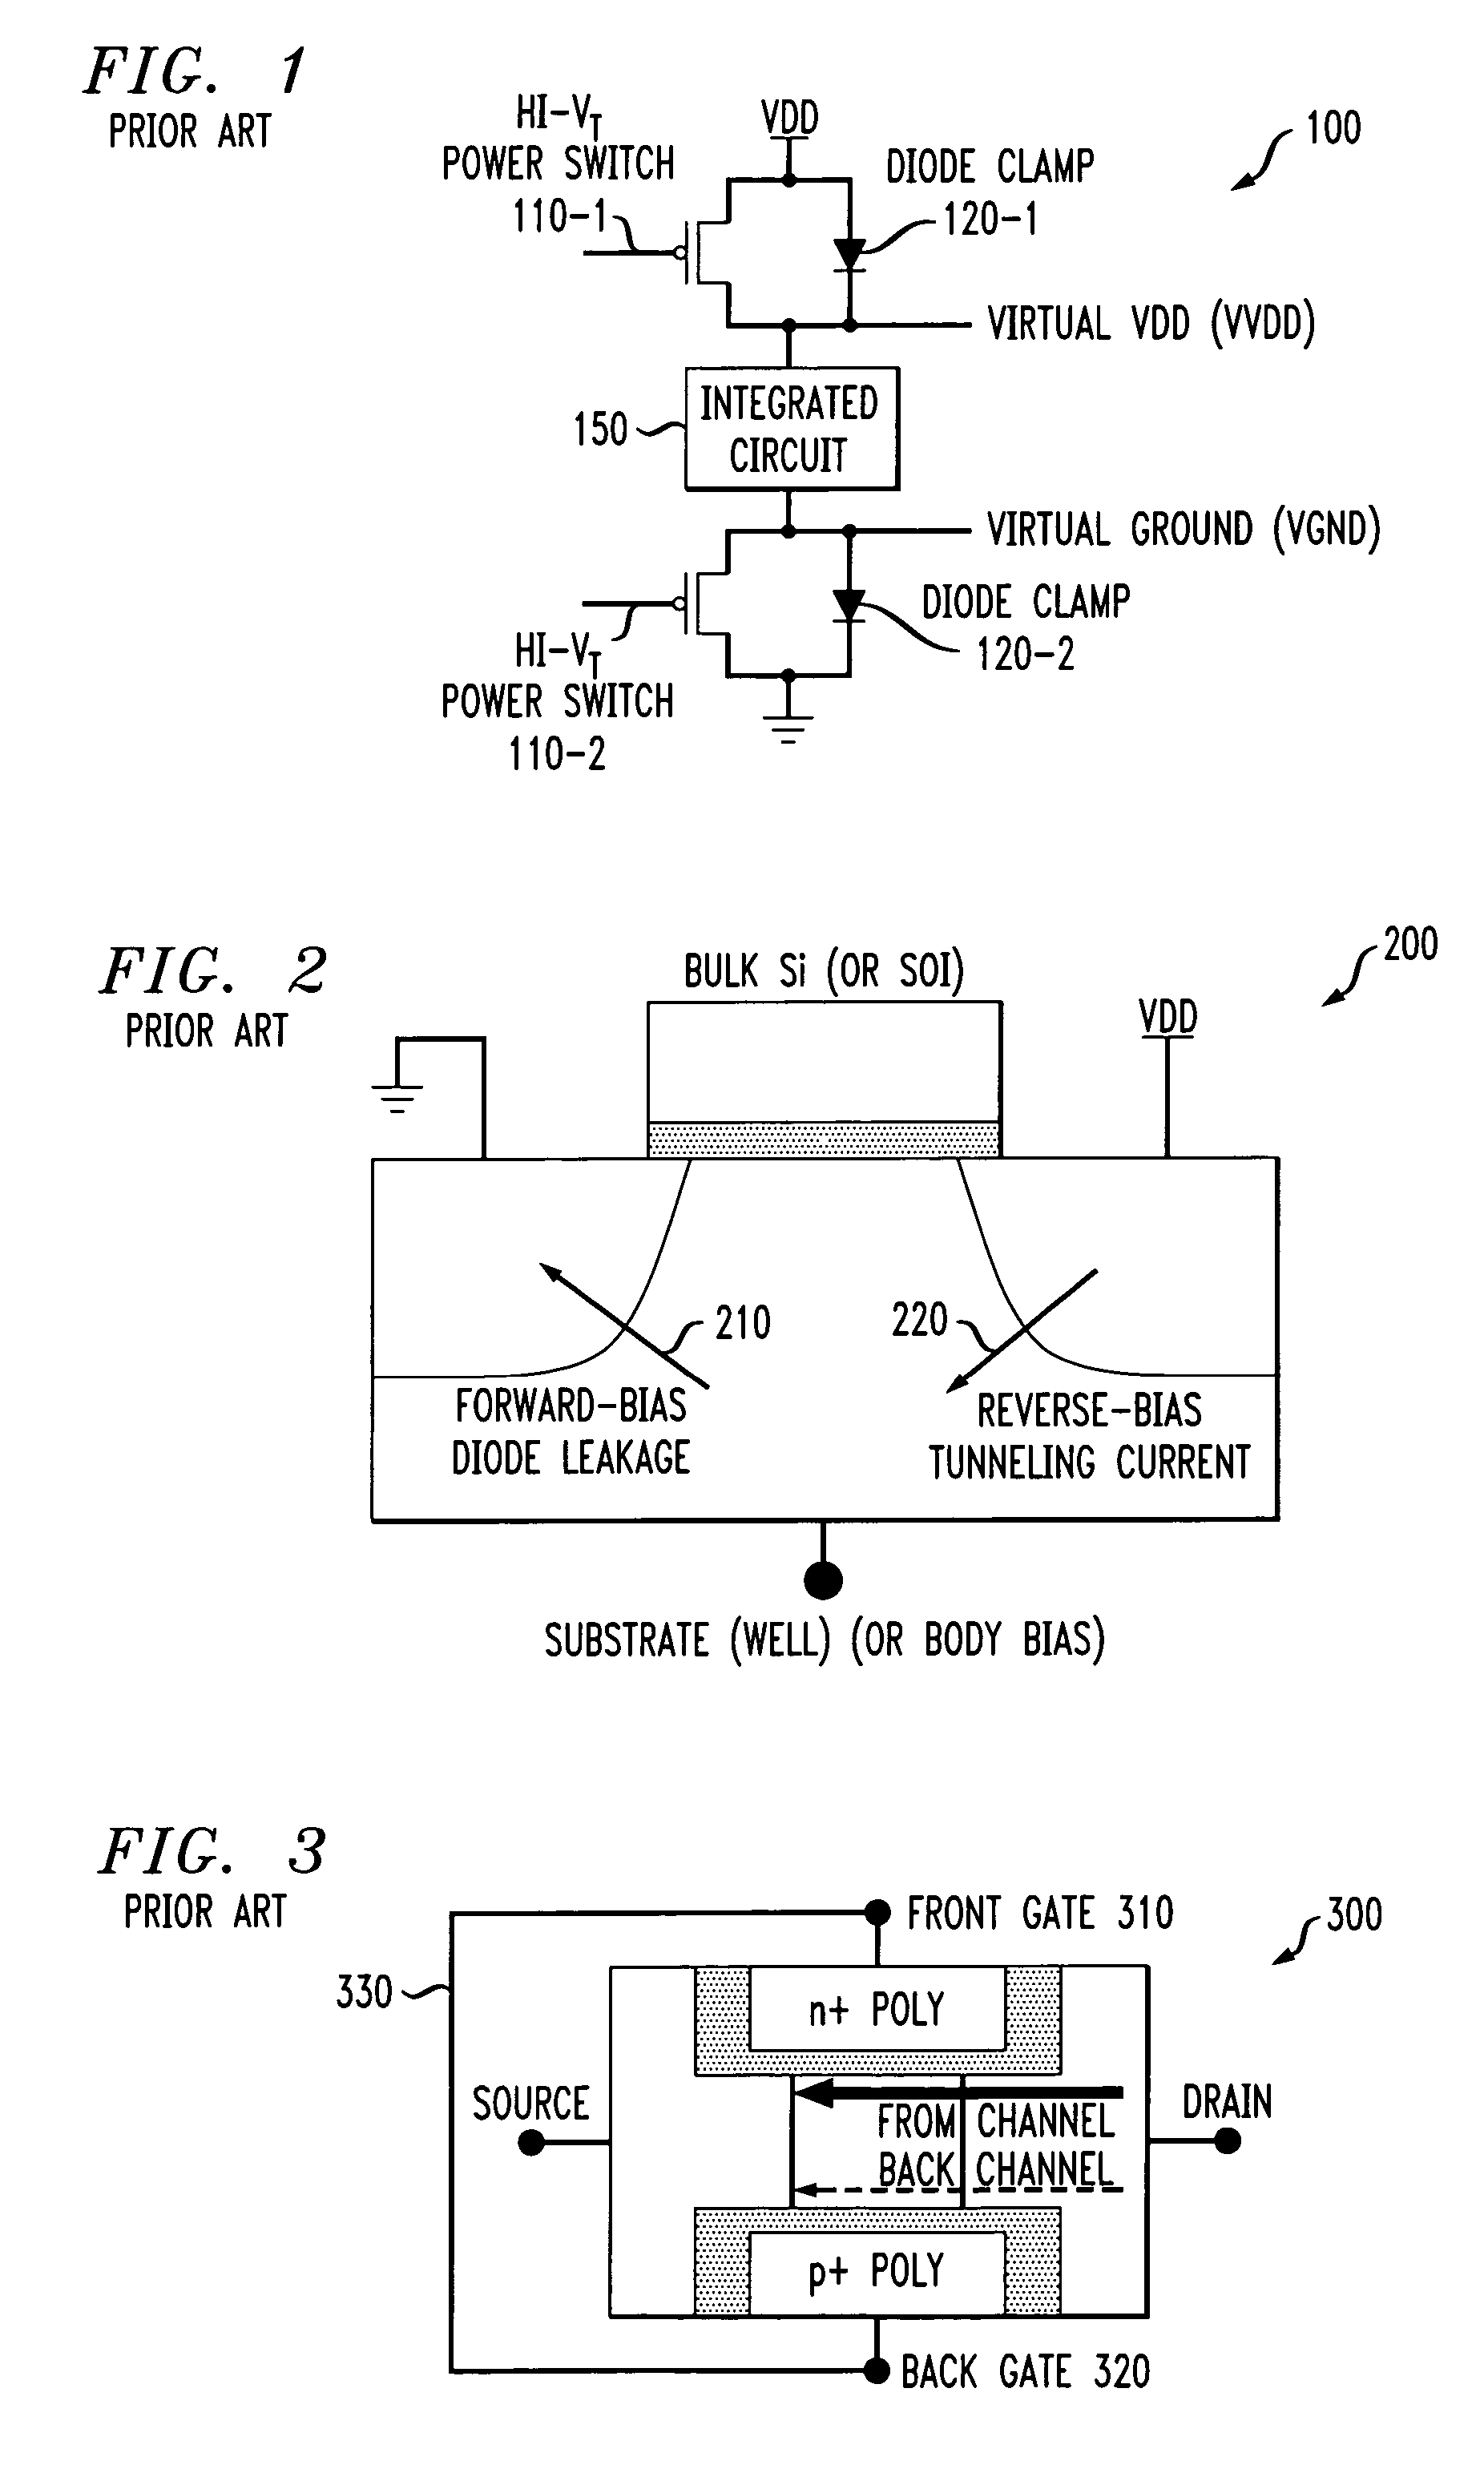 Methods and apparatus for varying a supply voltage or reference voltage using independent control of diode voltage in asymmetrical double-gate devices